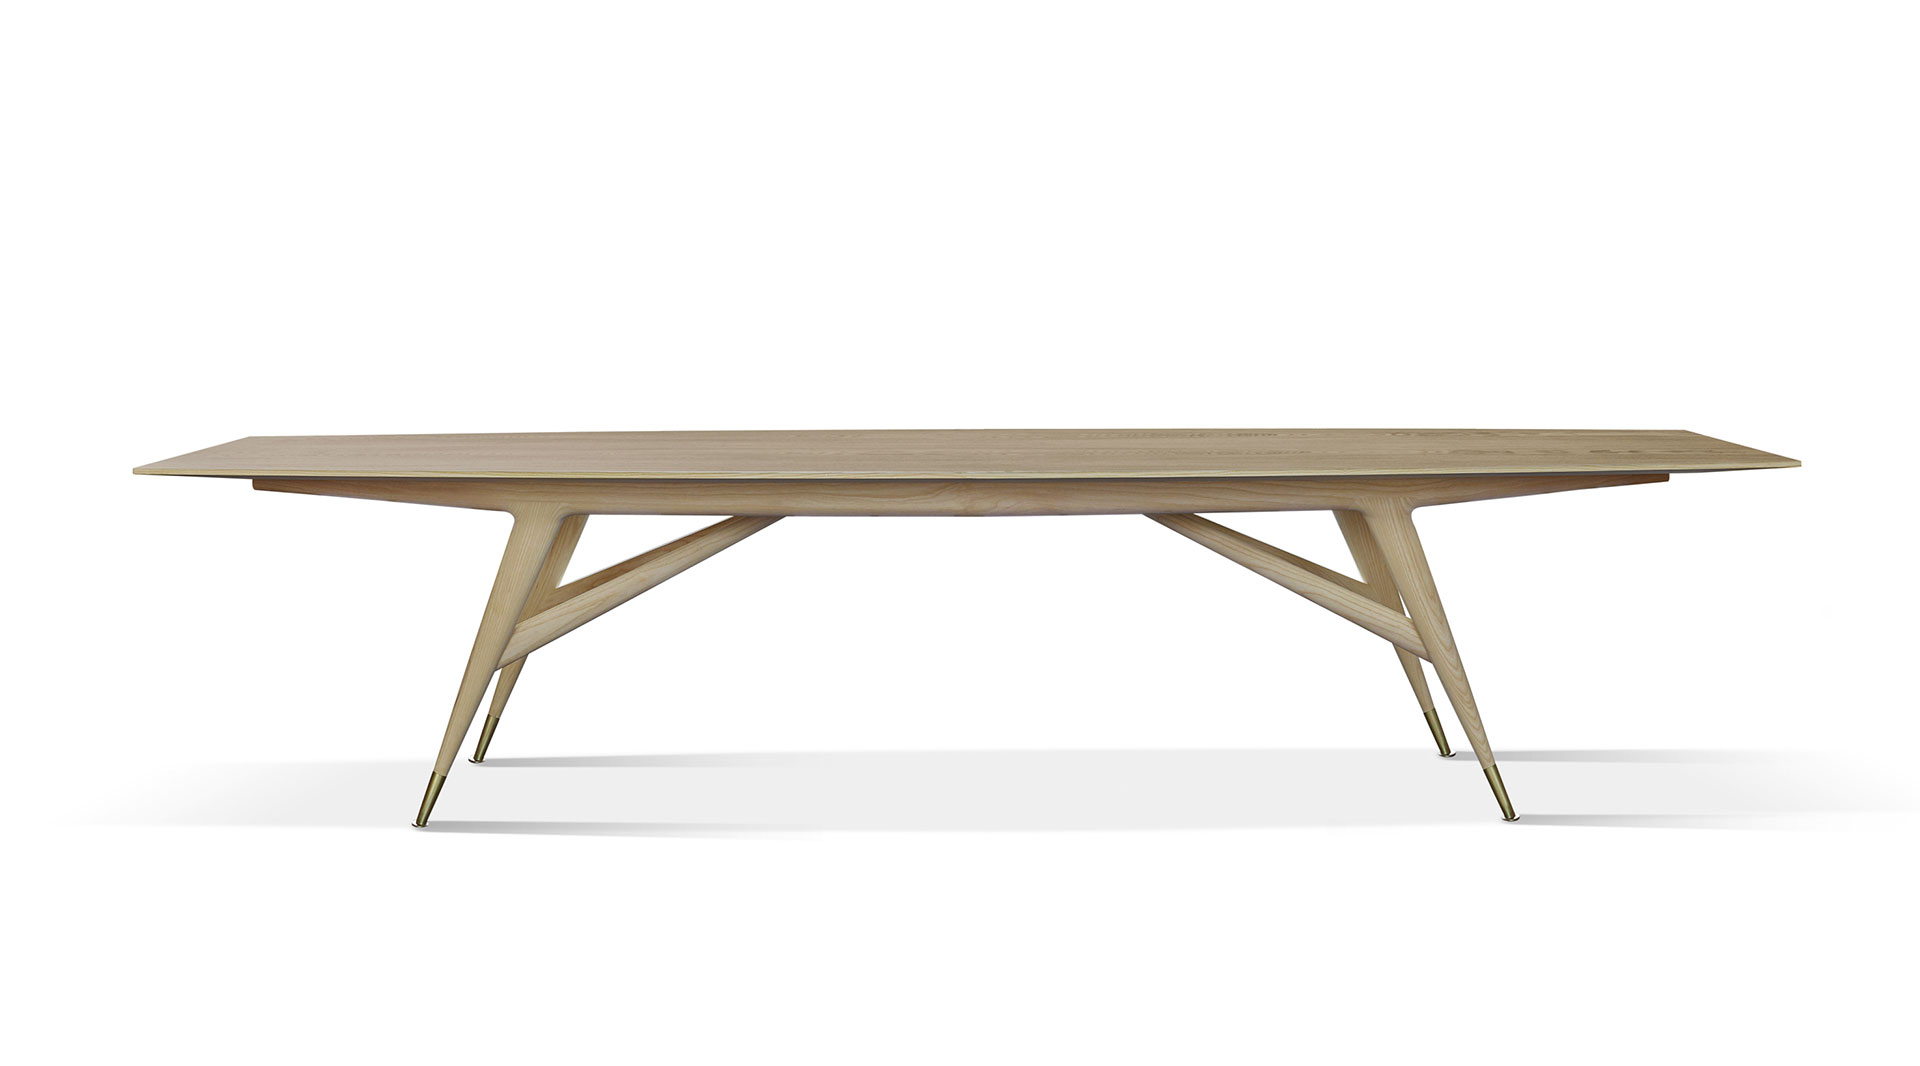 D.859.1 table by Gio Ponti